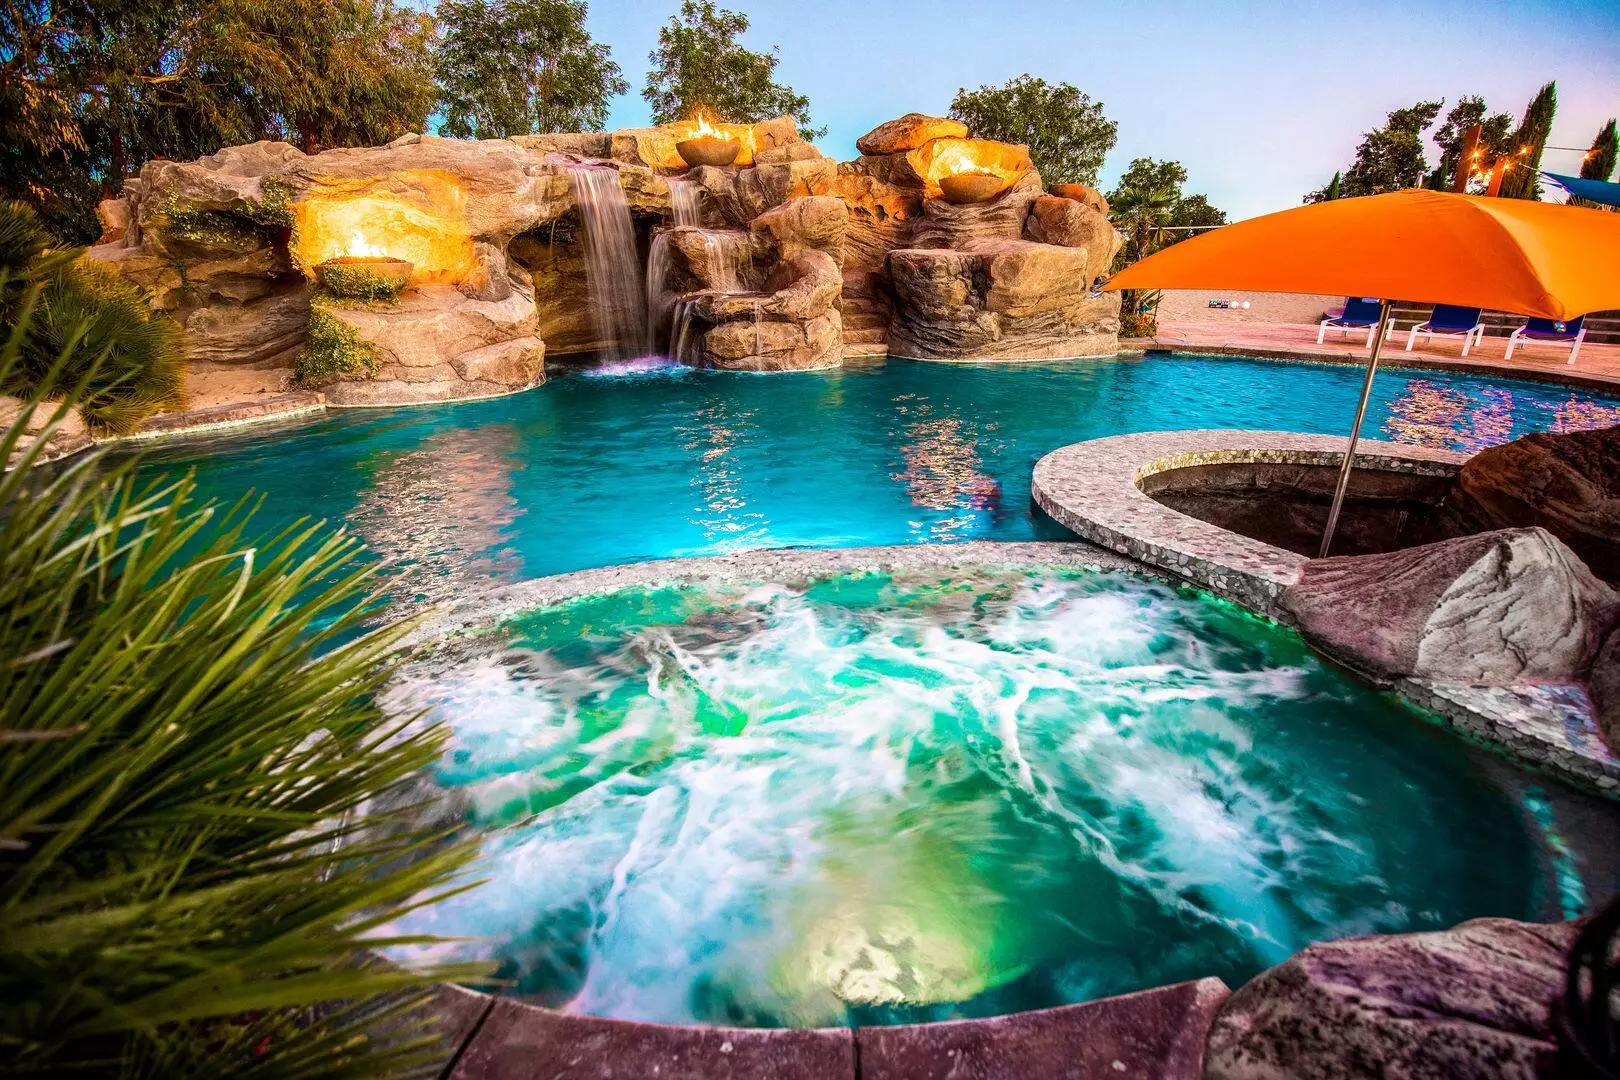 One of the main features of The Mermaid is its insane lagoon pool (